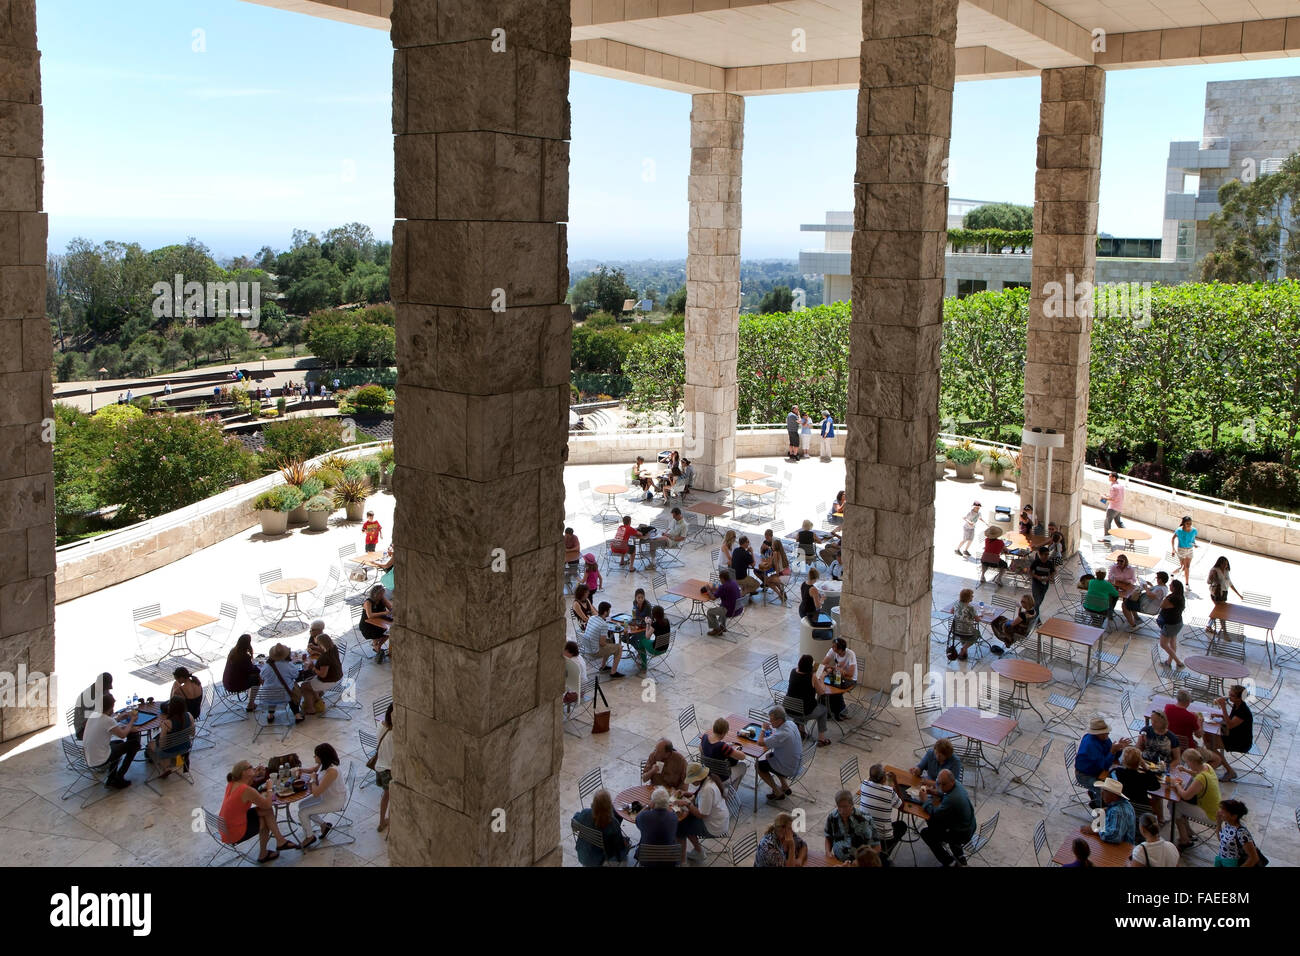 The garden terrace at the Getty Center in Los Angeles Stock Photo